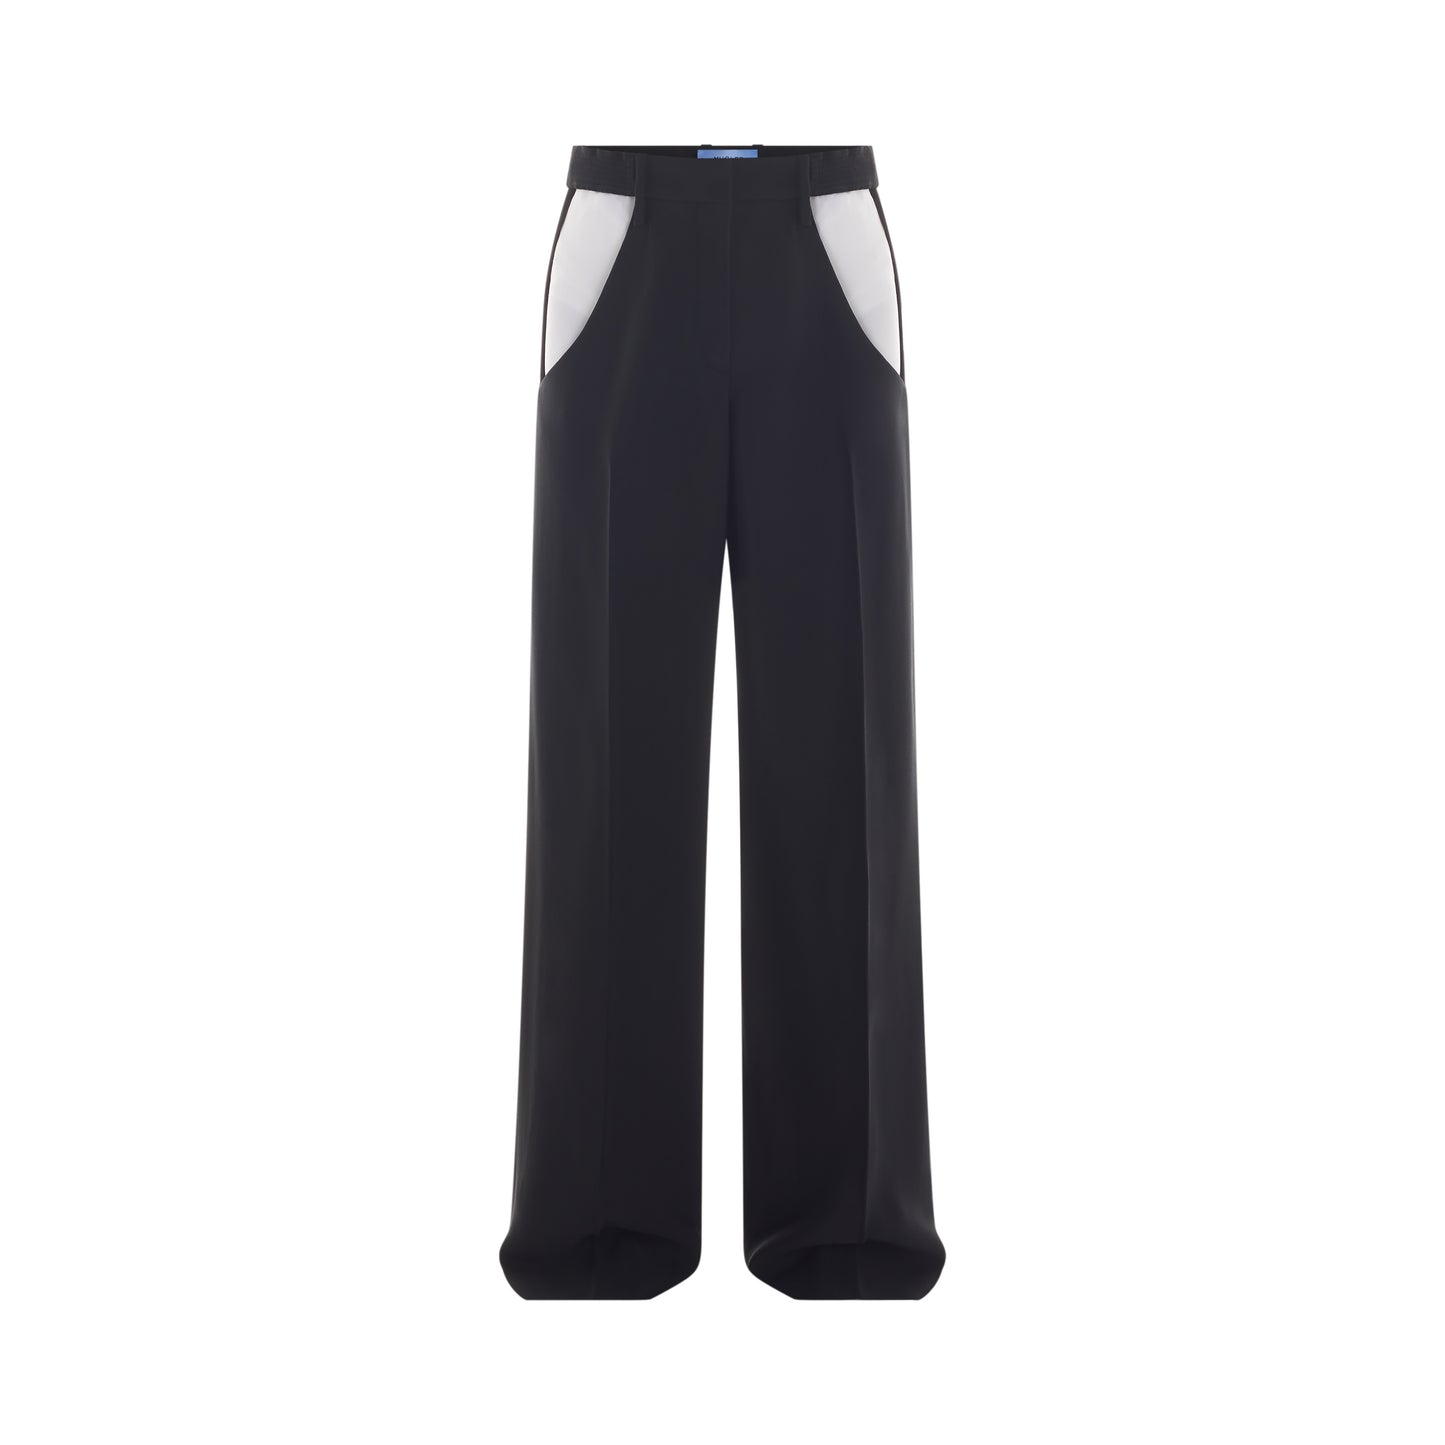 Cut-out trousers